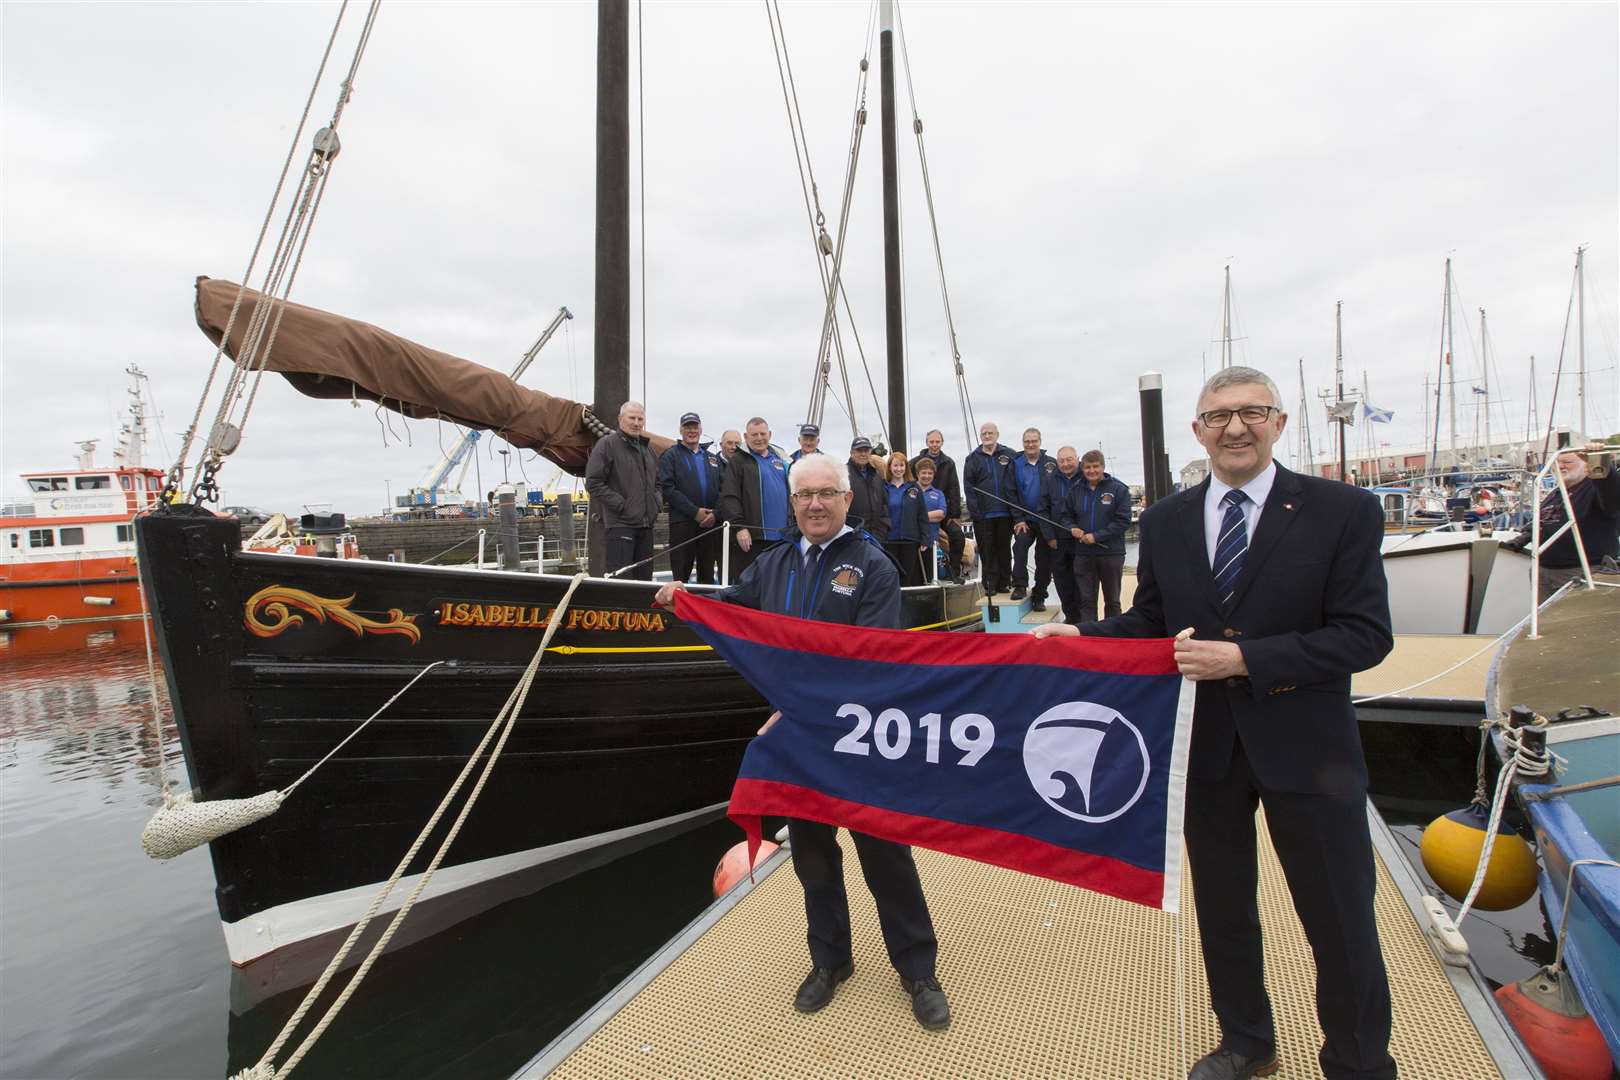 The regional flagship pennant is handed over to the Isabella Fortuna's skipper Malcolm Bremner (left) by Vice Lord-Lieutenant Willie Watt. Looking on are some of the crew and volunteers who sail and look after the historic vessel. Picture: Robert MacDonald / Northern Studios